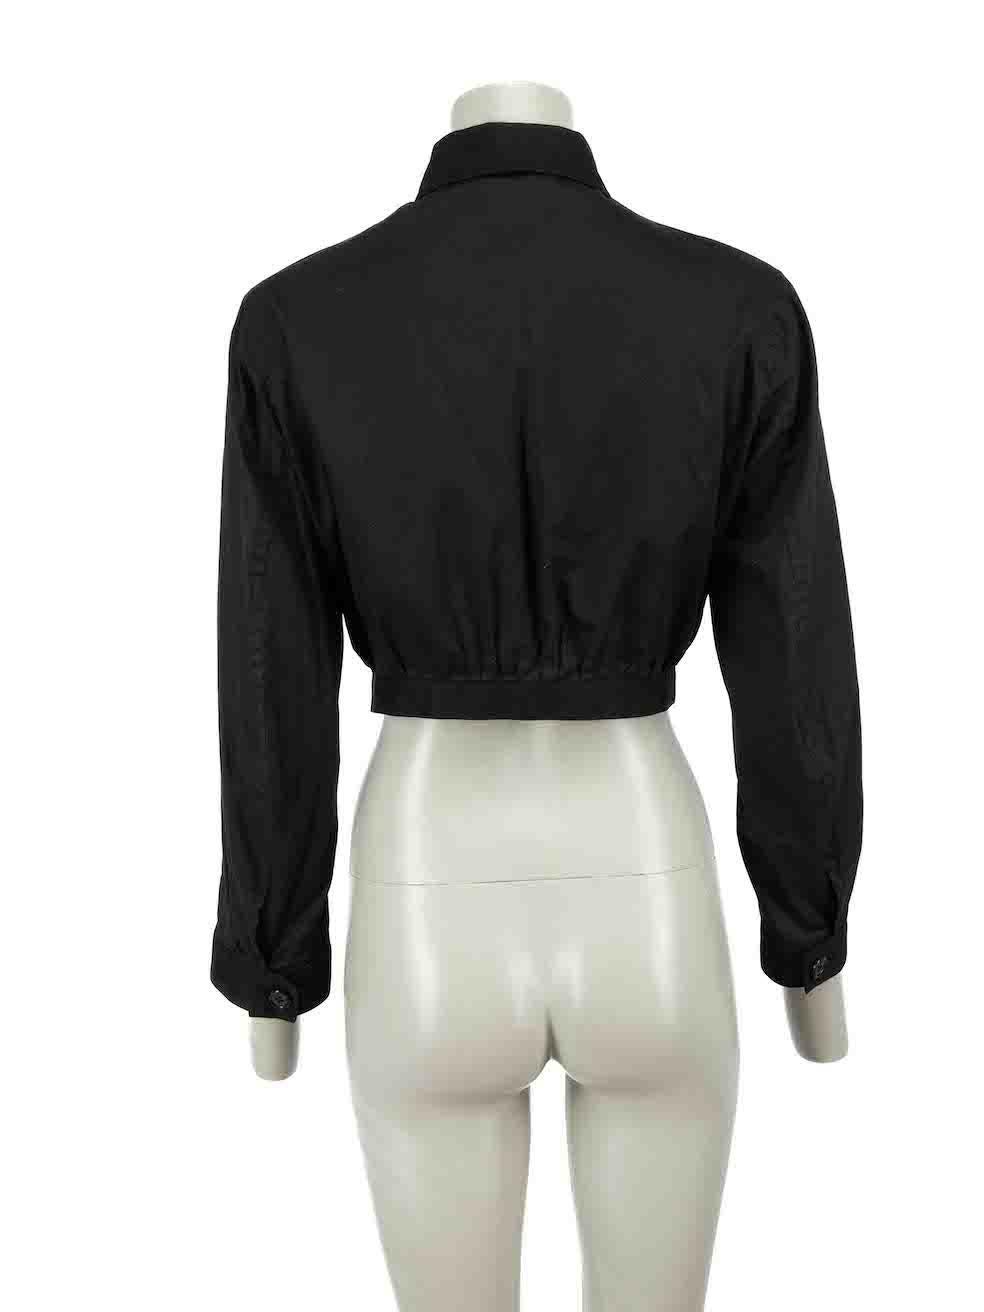 Yohji Yamamoto Vintage Black Zip Up Cropped Jacket Size S In Excellent Condition For Sale In London, GB